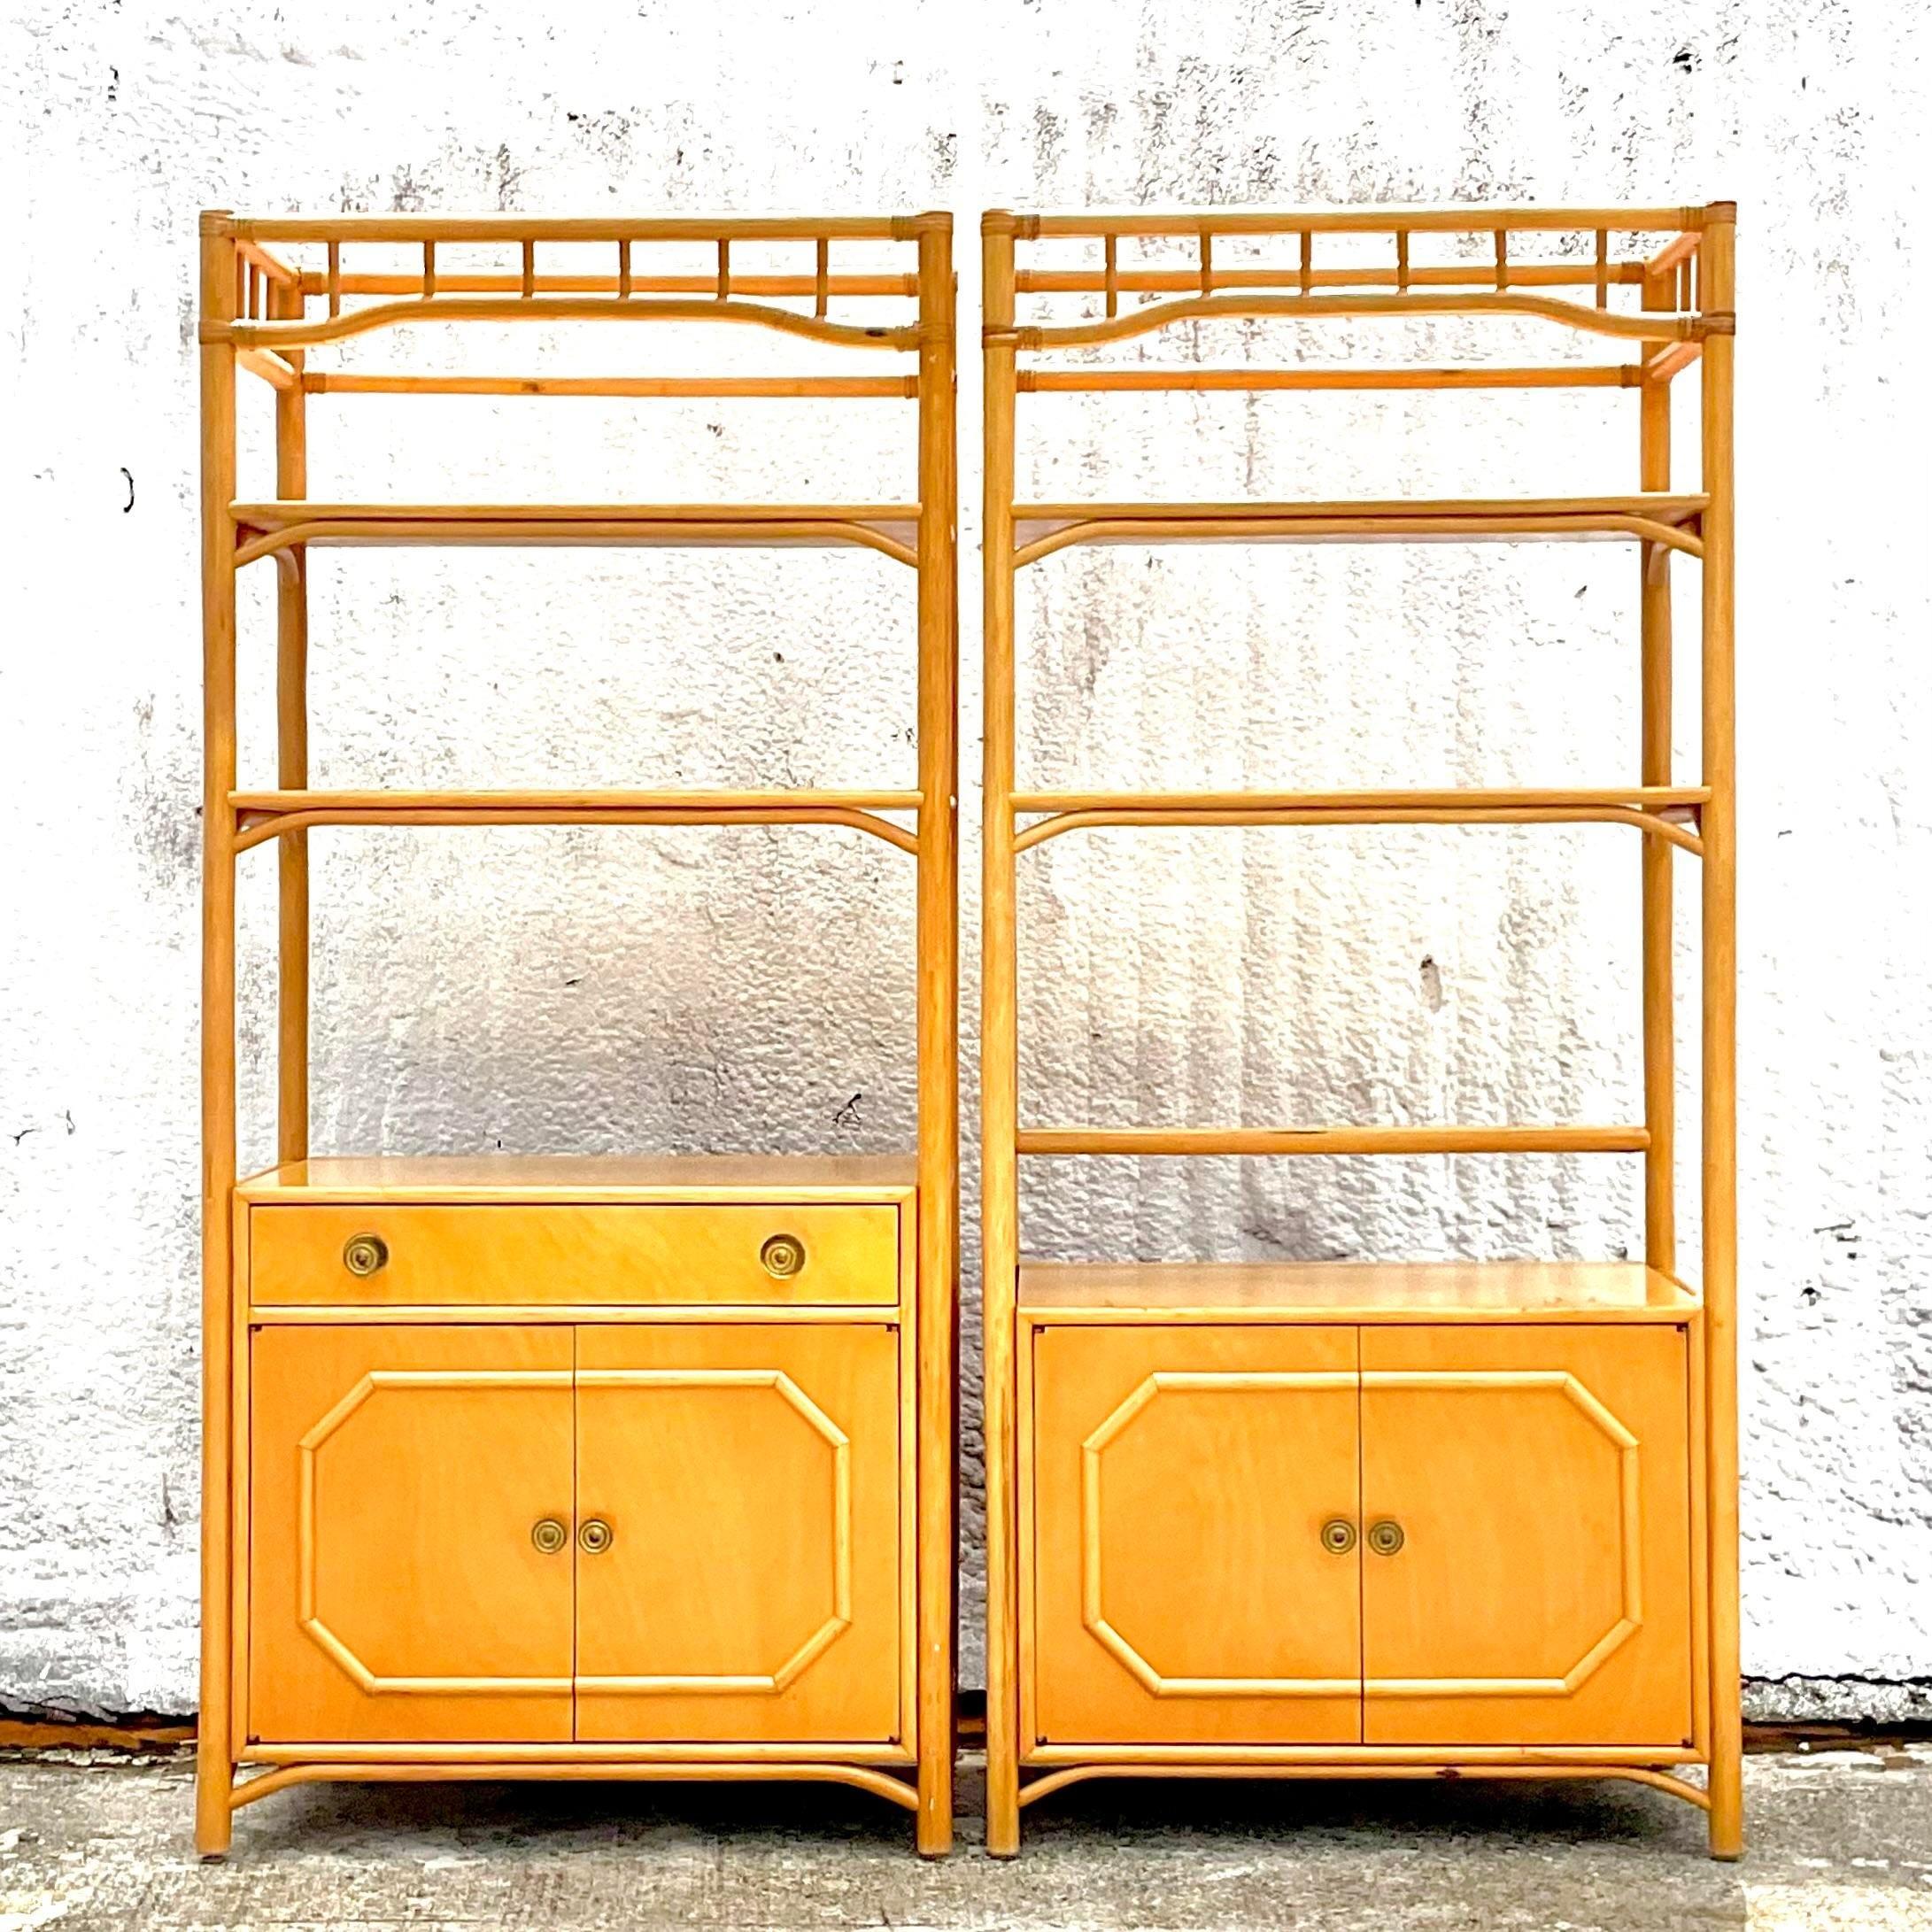 A fabulous set of 2 vintage Costal Etagere. Made by the iconic Ficks Reed group. Beautiful wood and rattan cabinet with inset glass shelves. Lots of great storage below. Acquired from a Palm Beach estate.